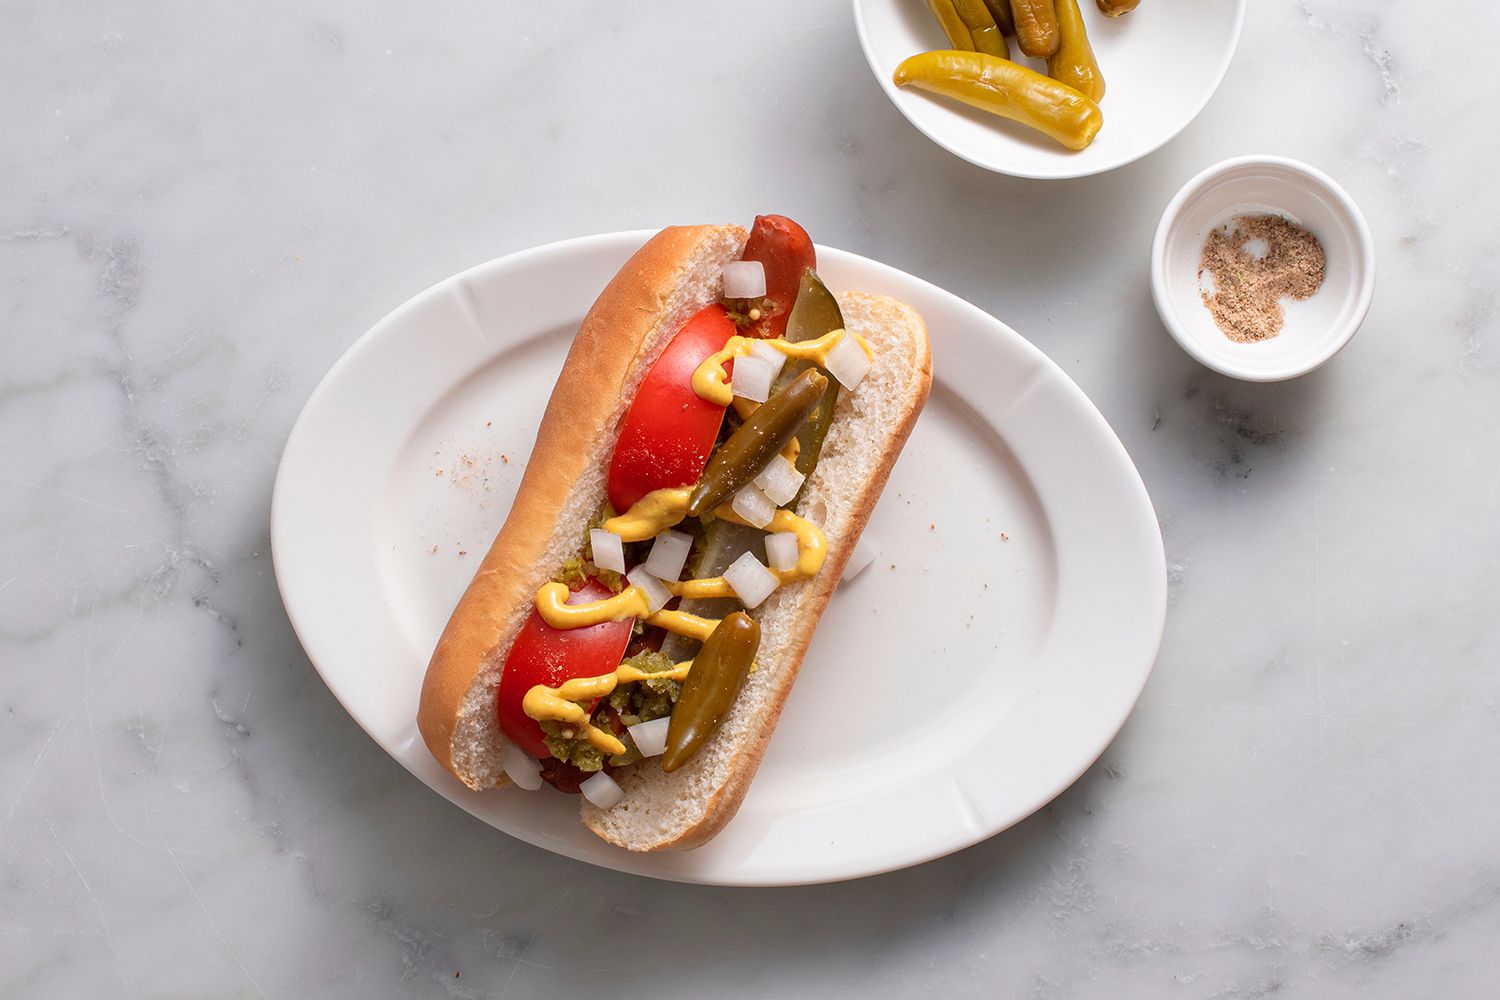 A Chicago hot dog topped with sport peppers and celery salt